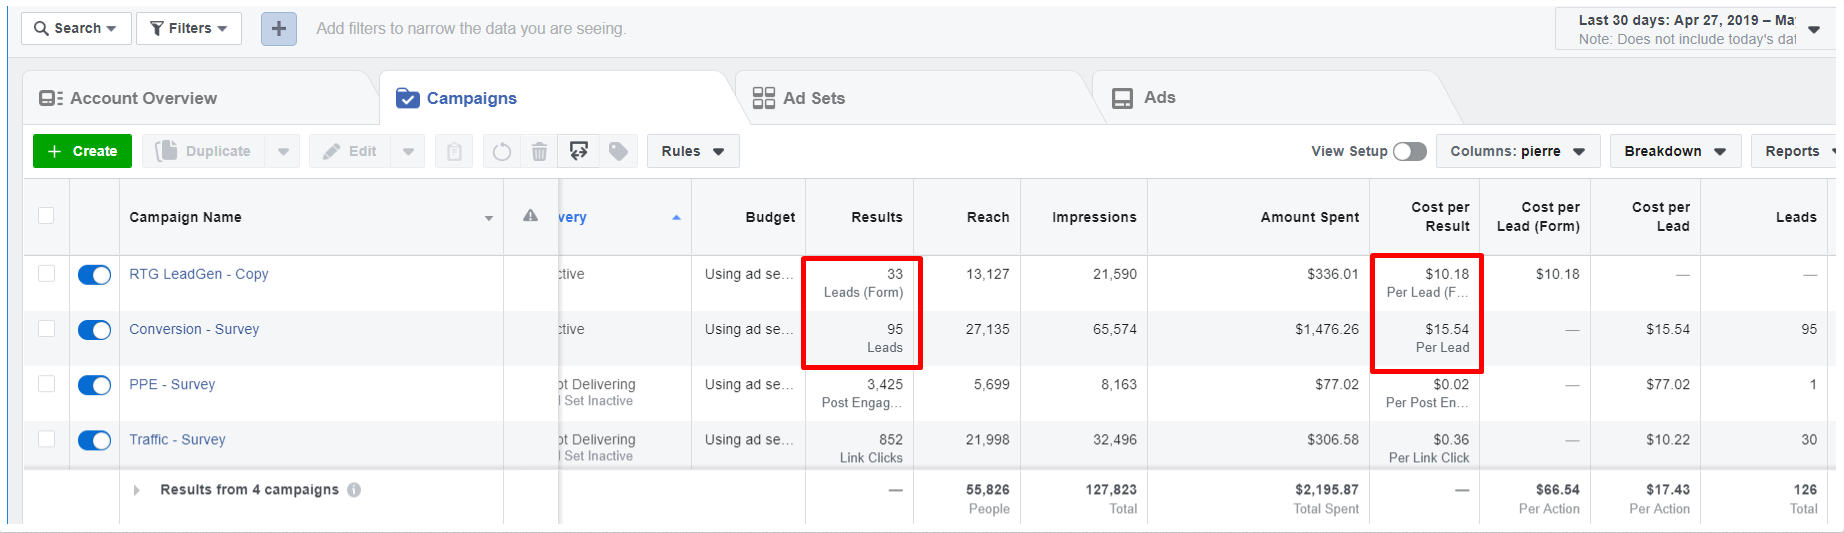 Facebook Ads study on 148,187 campaigns. DISCOVER THE RESULTS